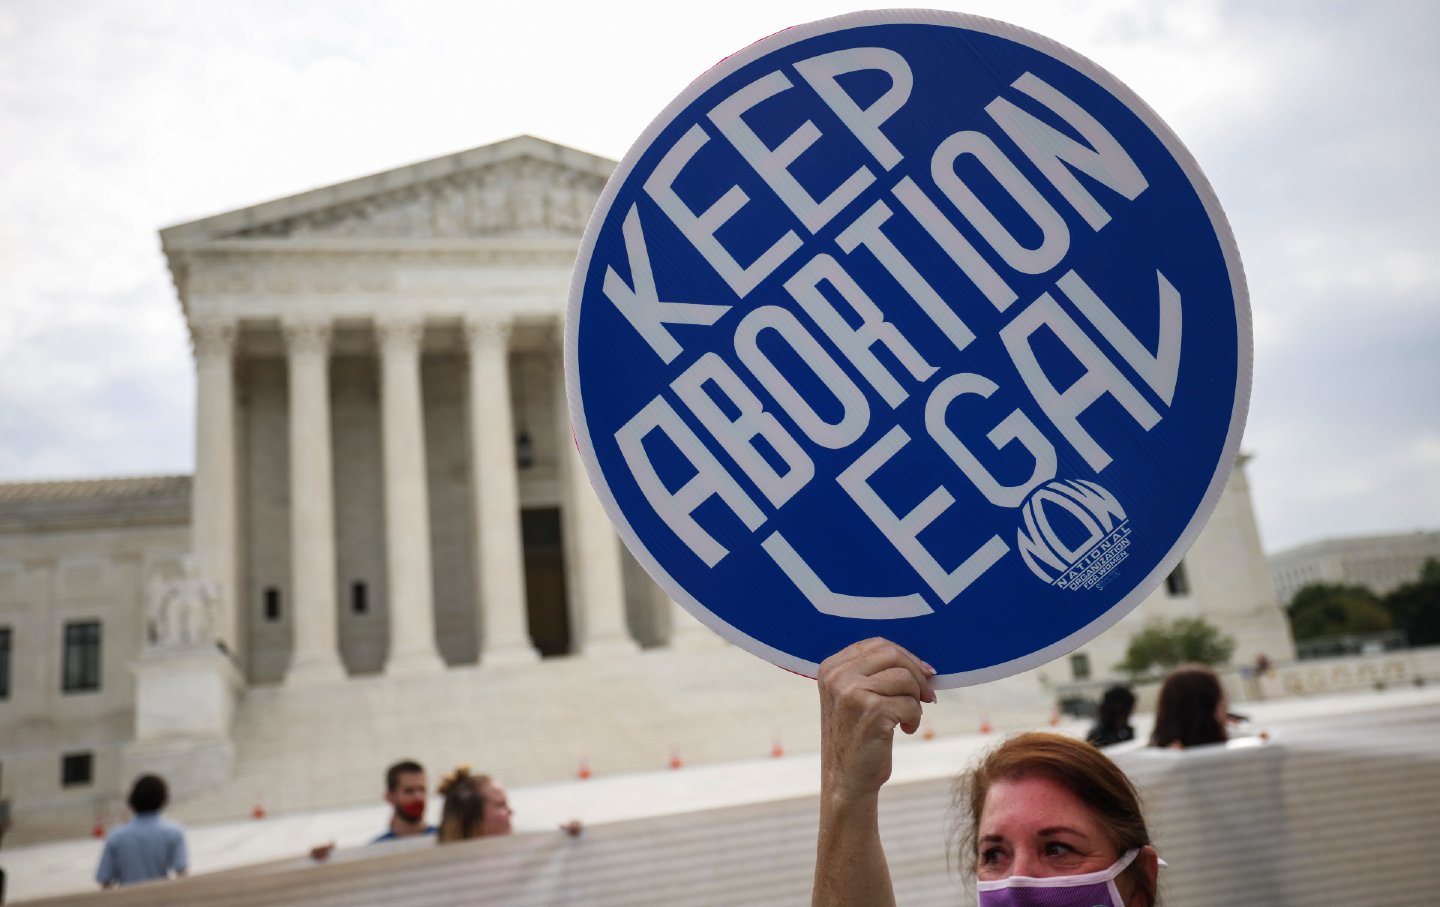 As the Supreme Court Weighs the Future of Abortion, Women Are Already Suffering